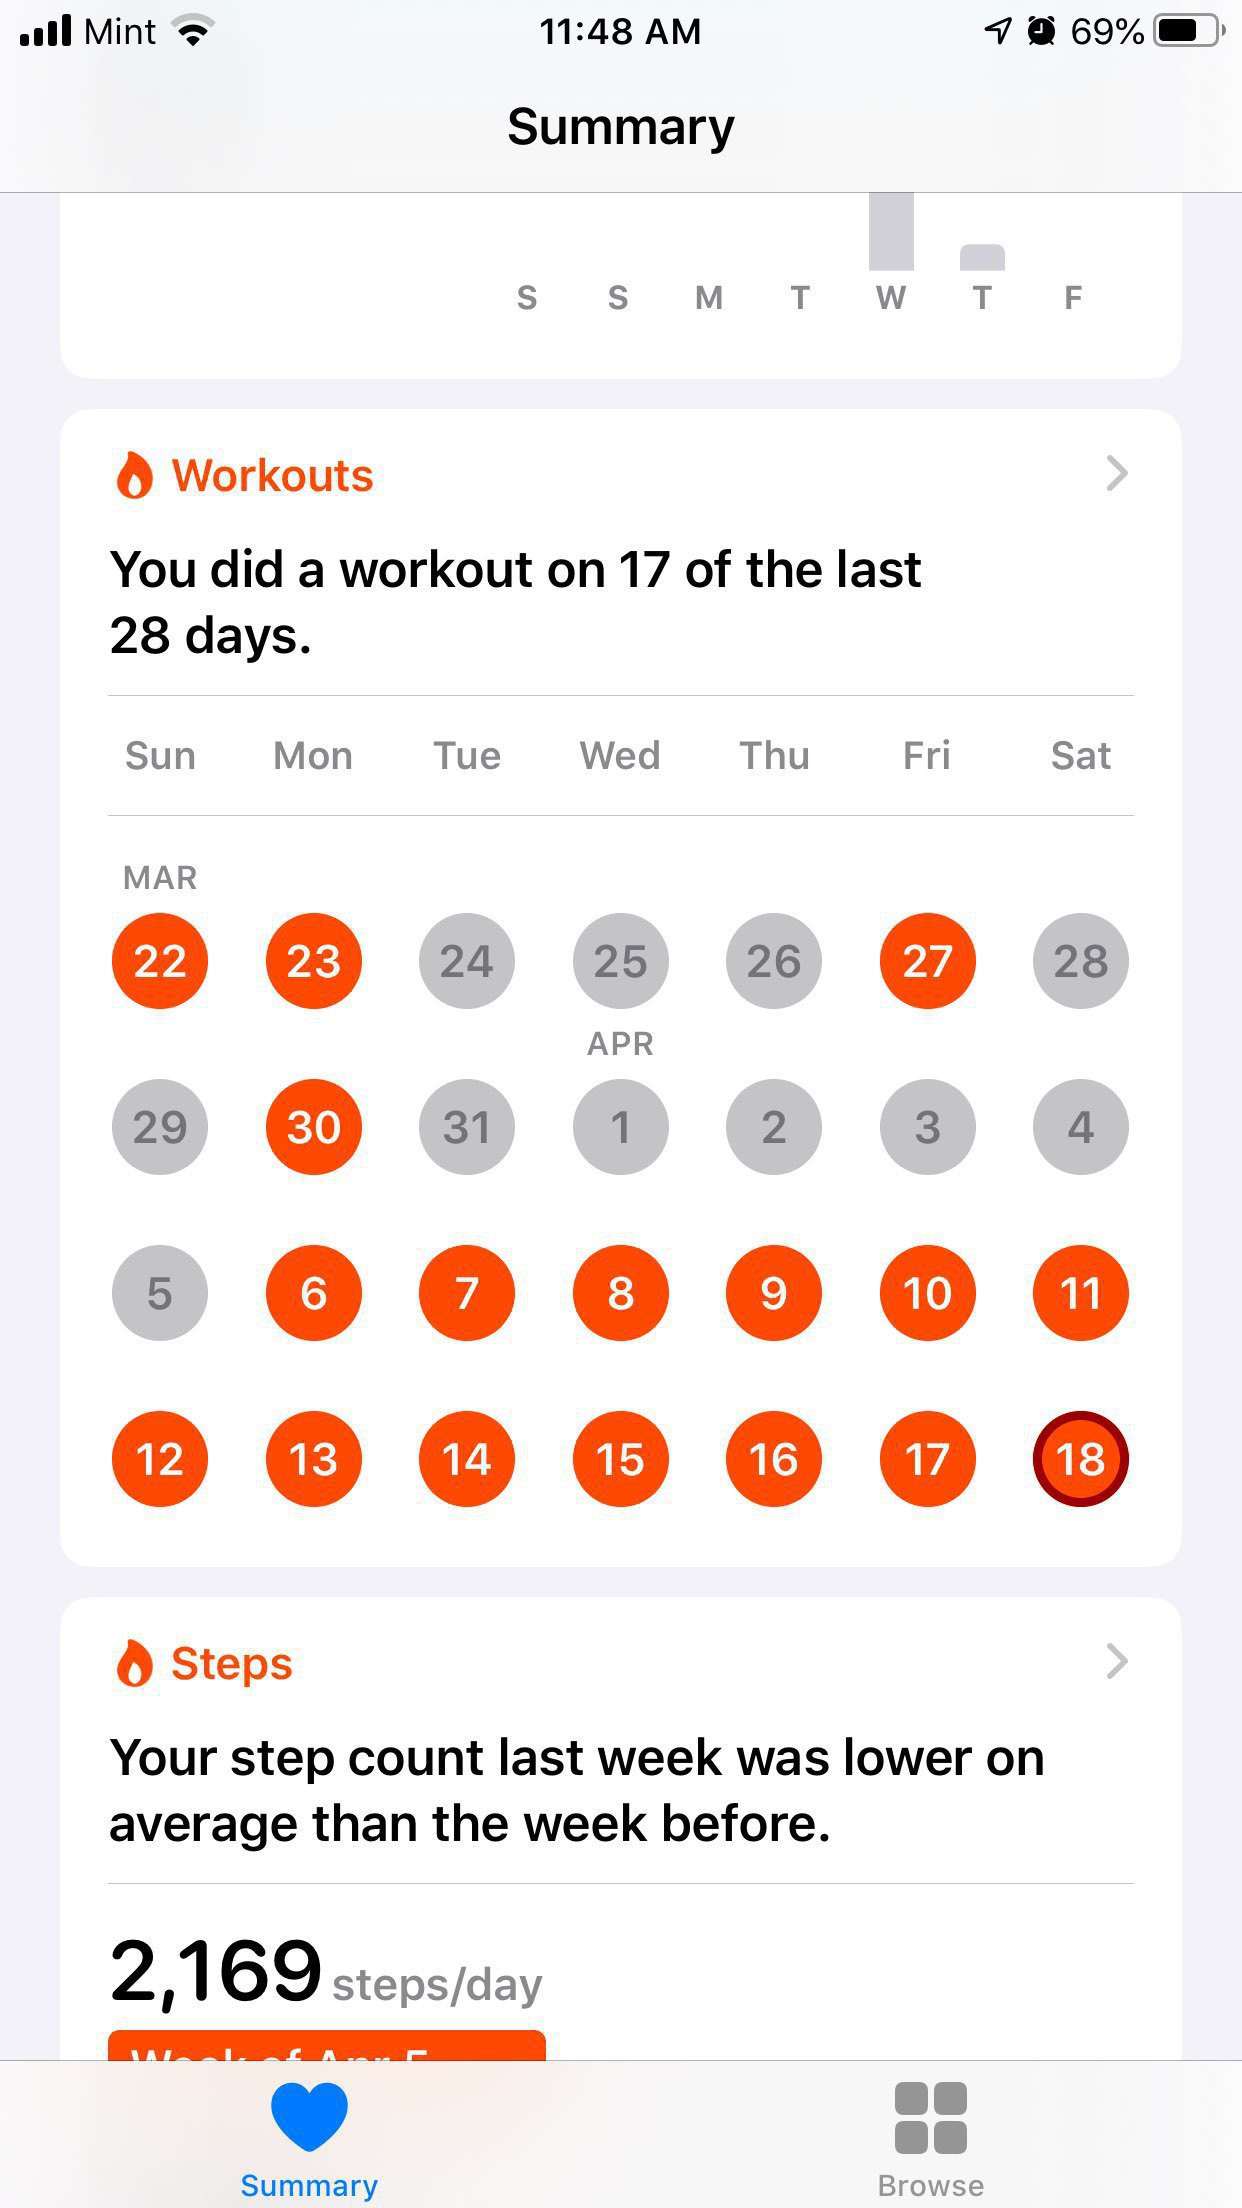 Health data: Working out more. 